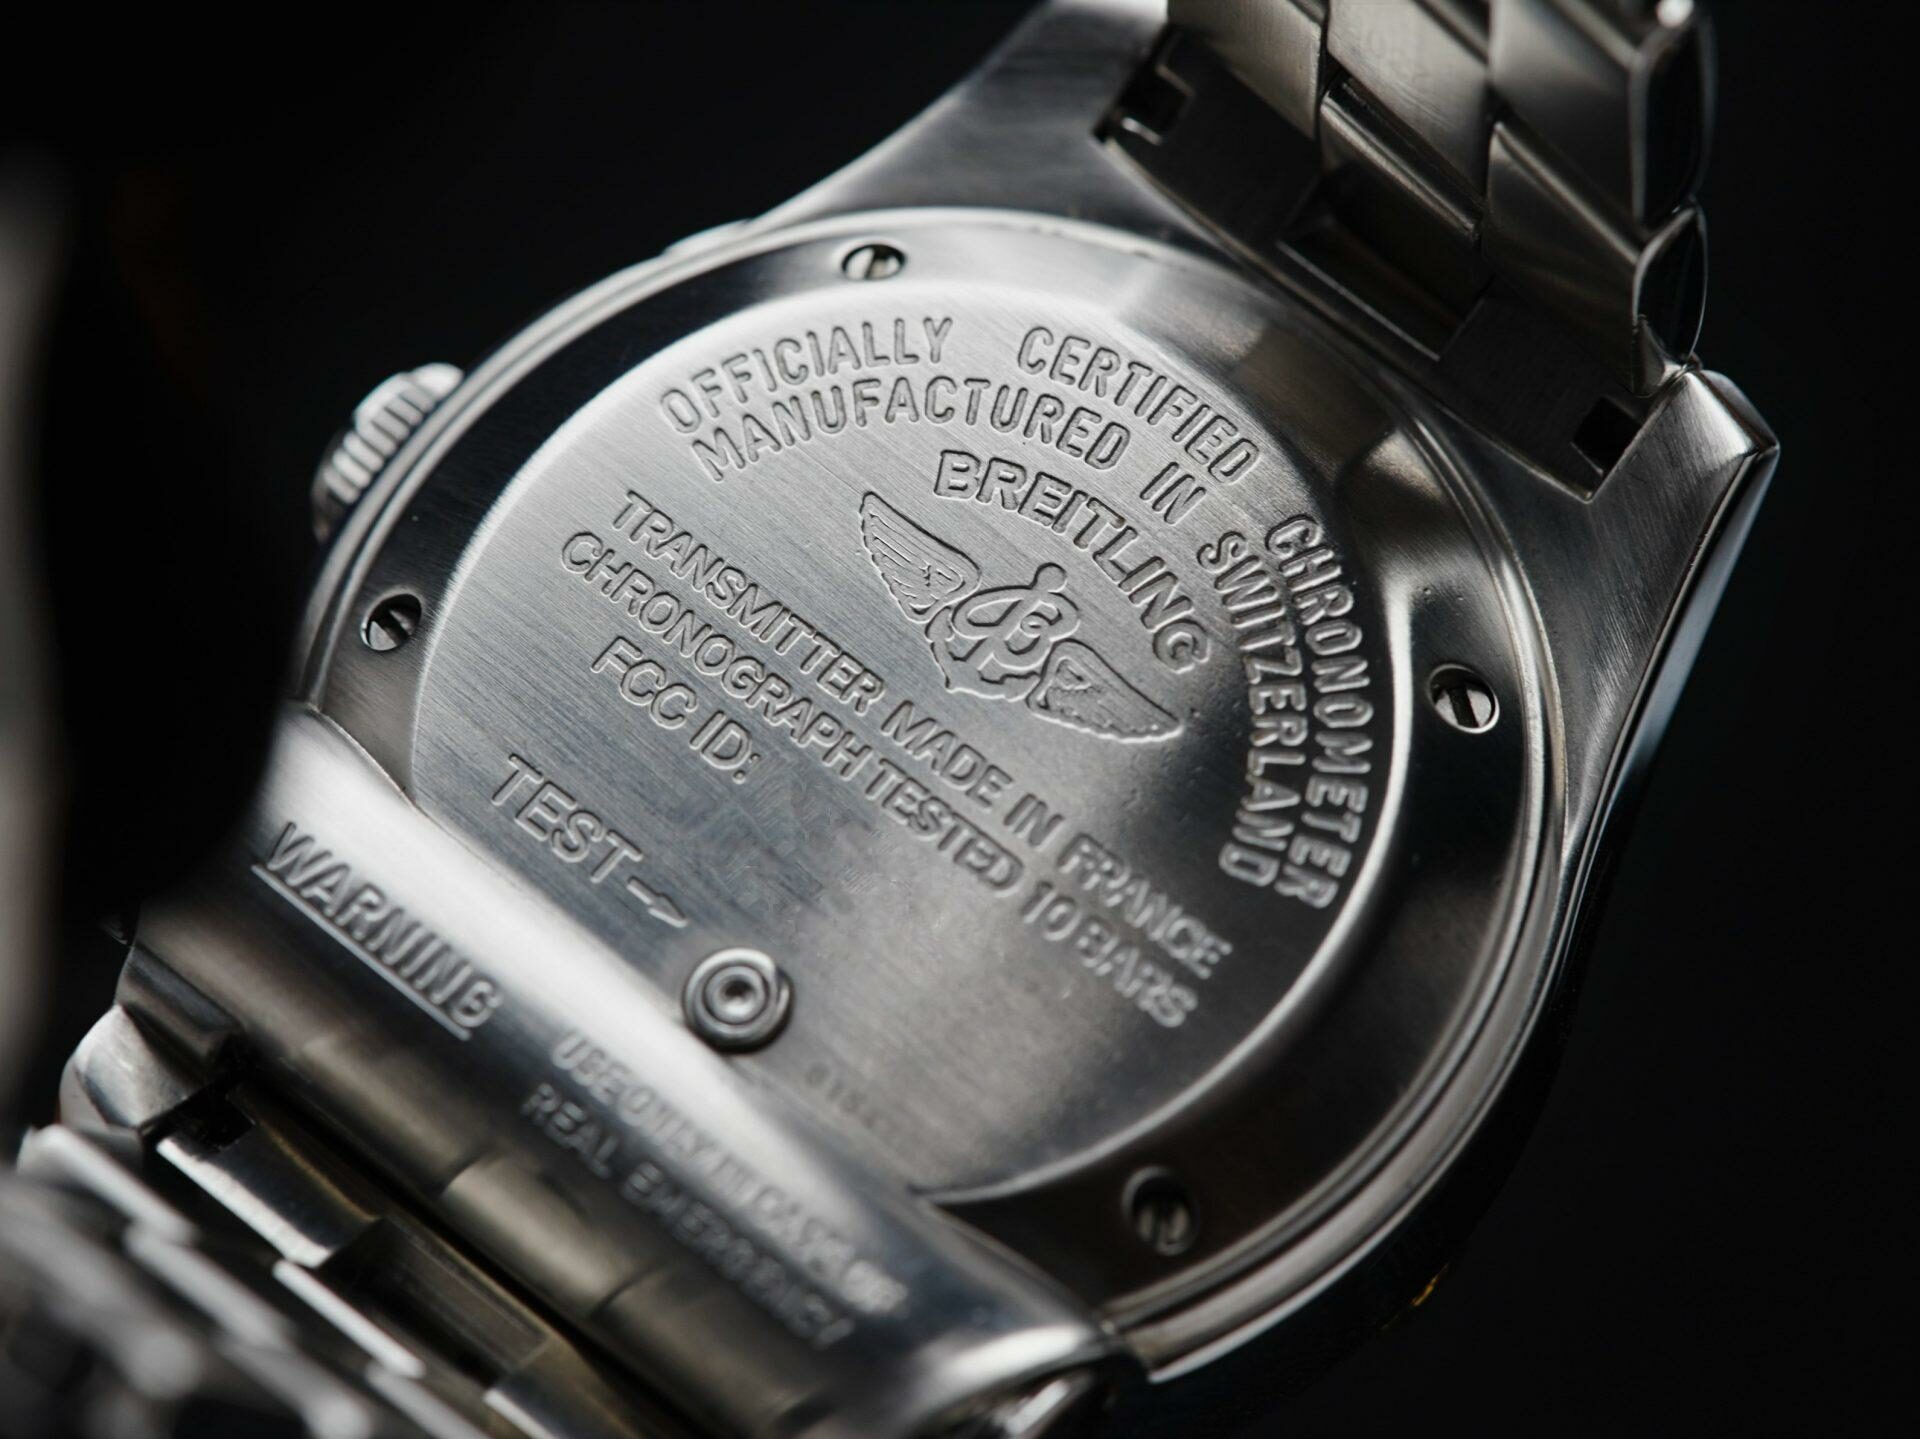 Back side of the Breitling Emergency Mission watch.